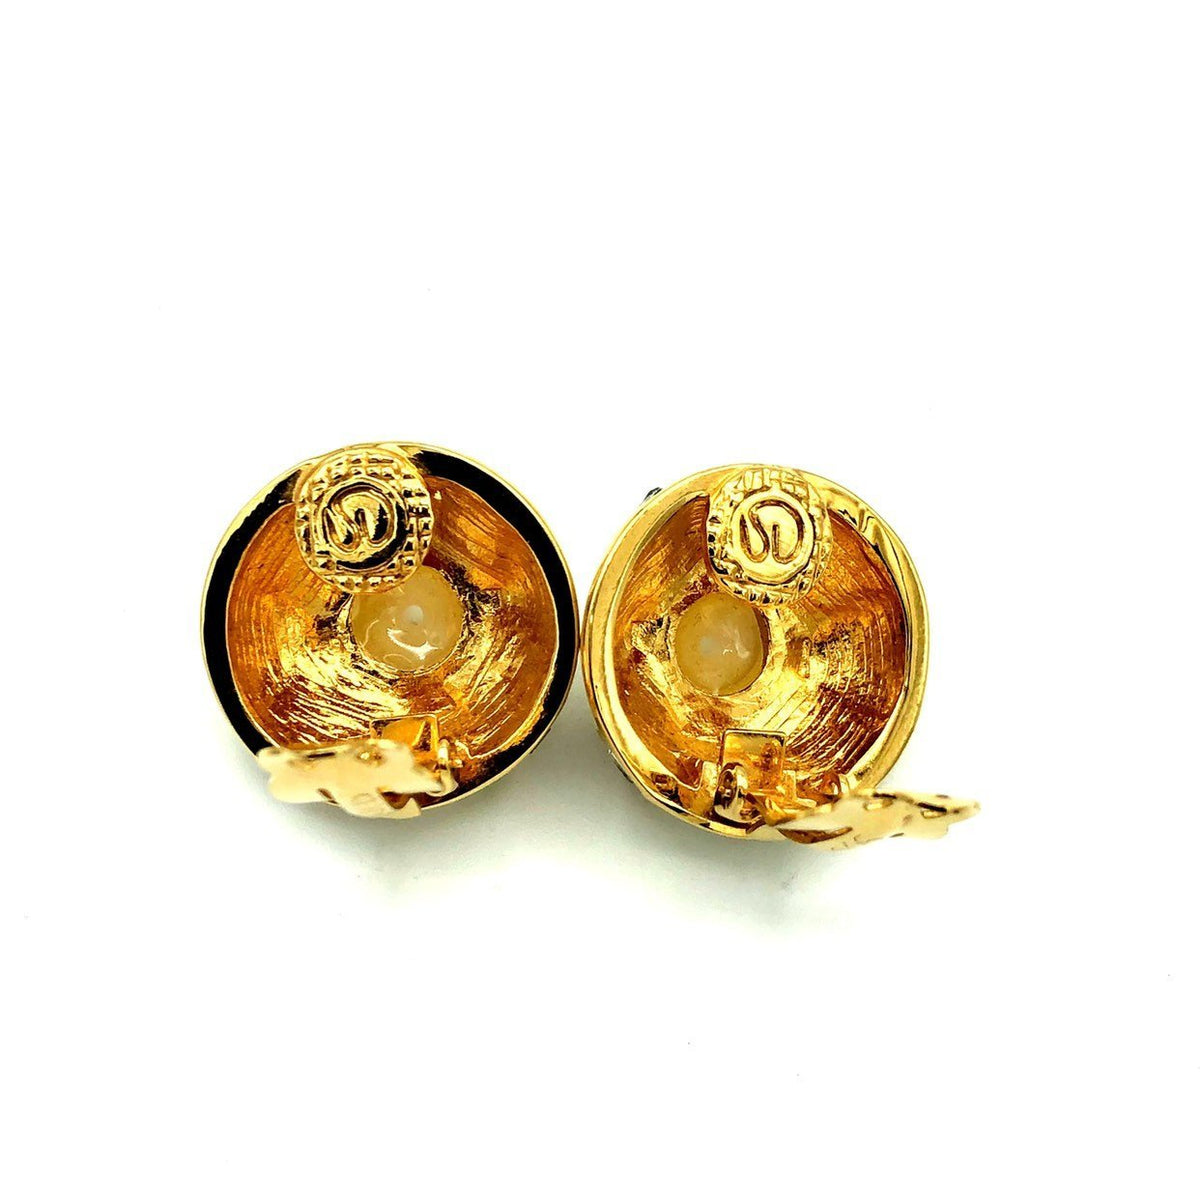 Gold St. John Round Enamel Pearl Vintage Clip-On Earrings - 24 Wishes Vintage Jewelry